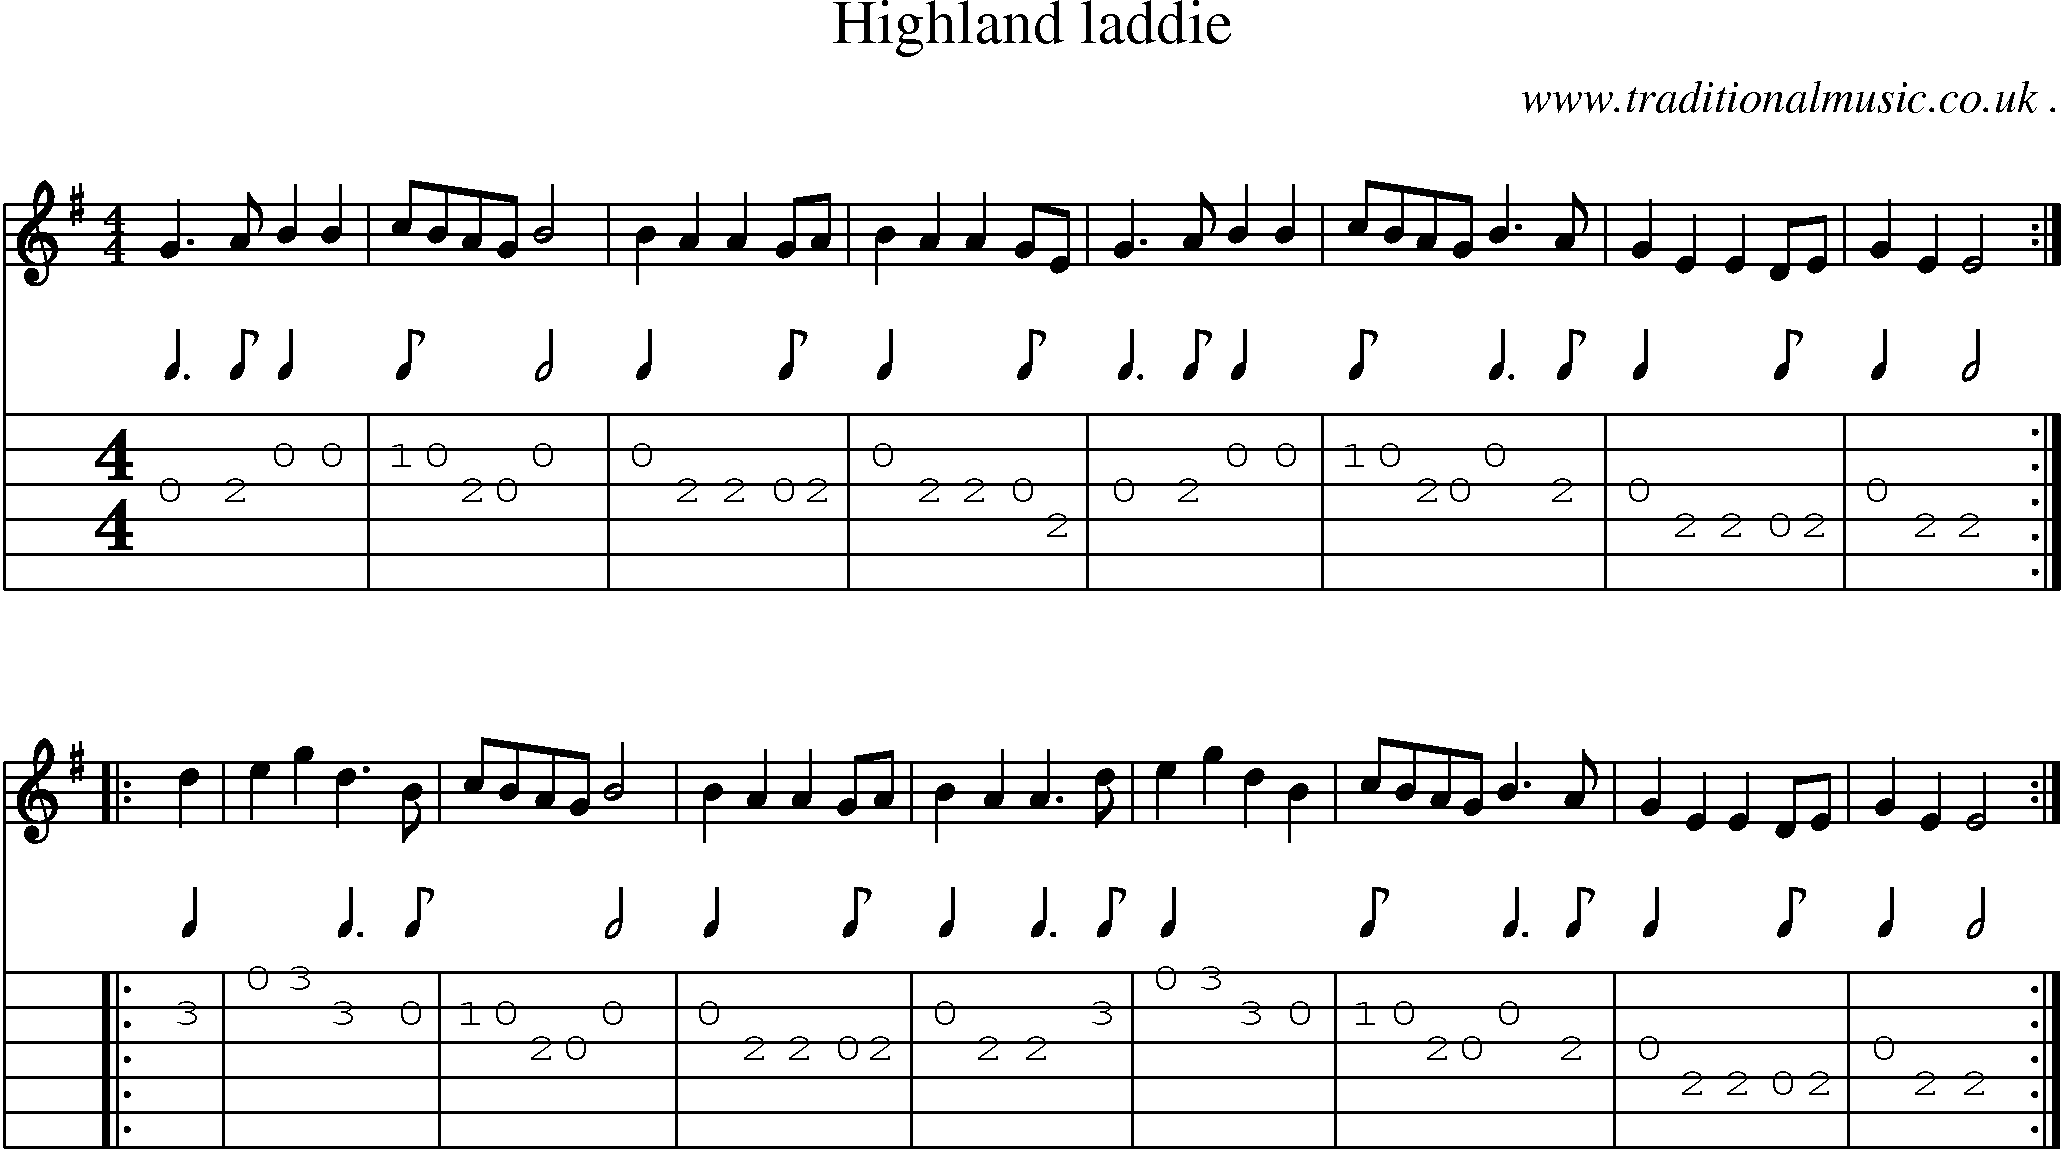 Sheet-music  score, Chords and Guitar Tabs for Highland Laddie